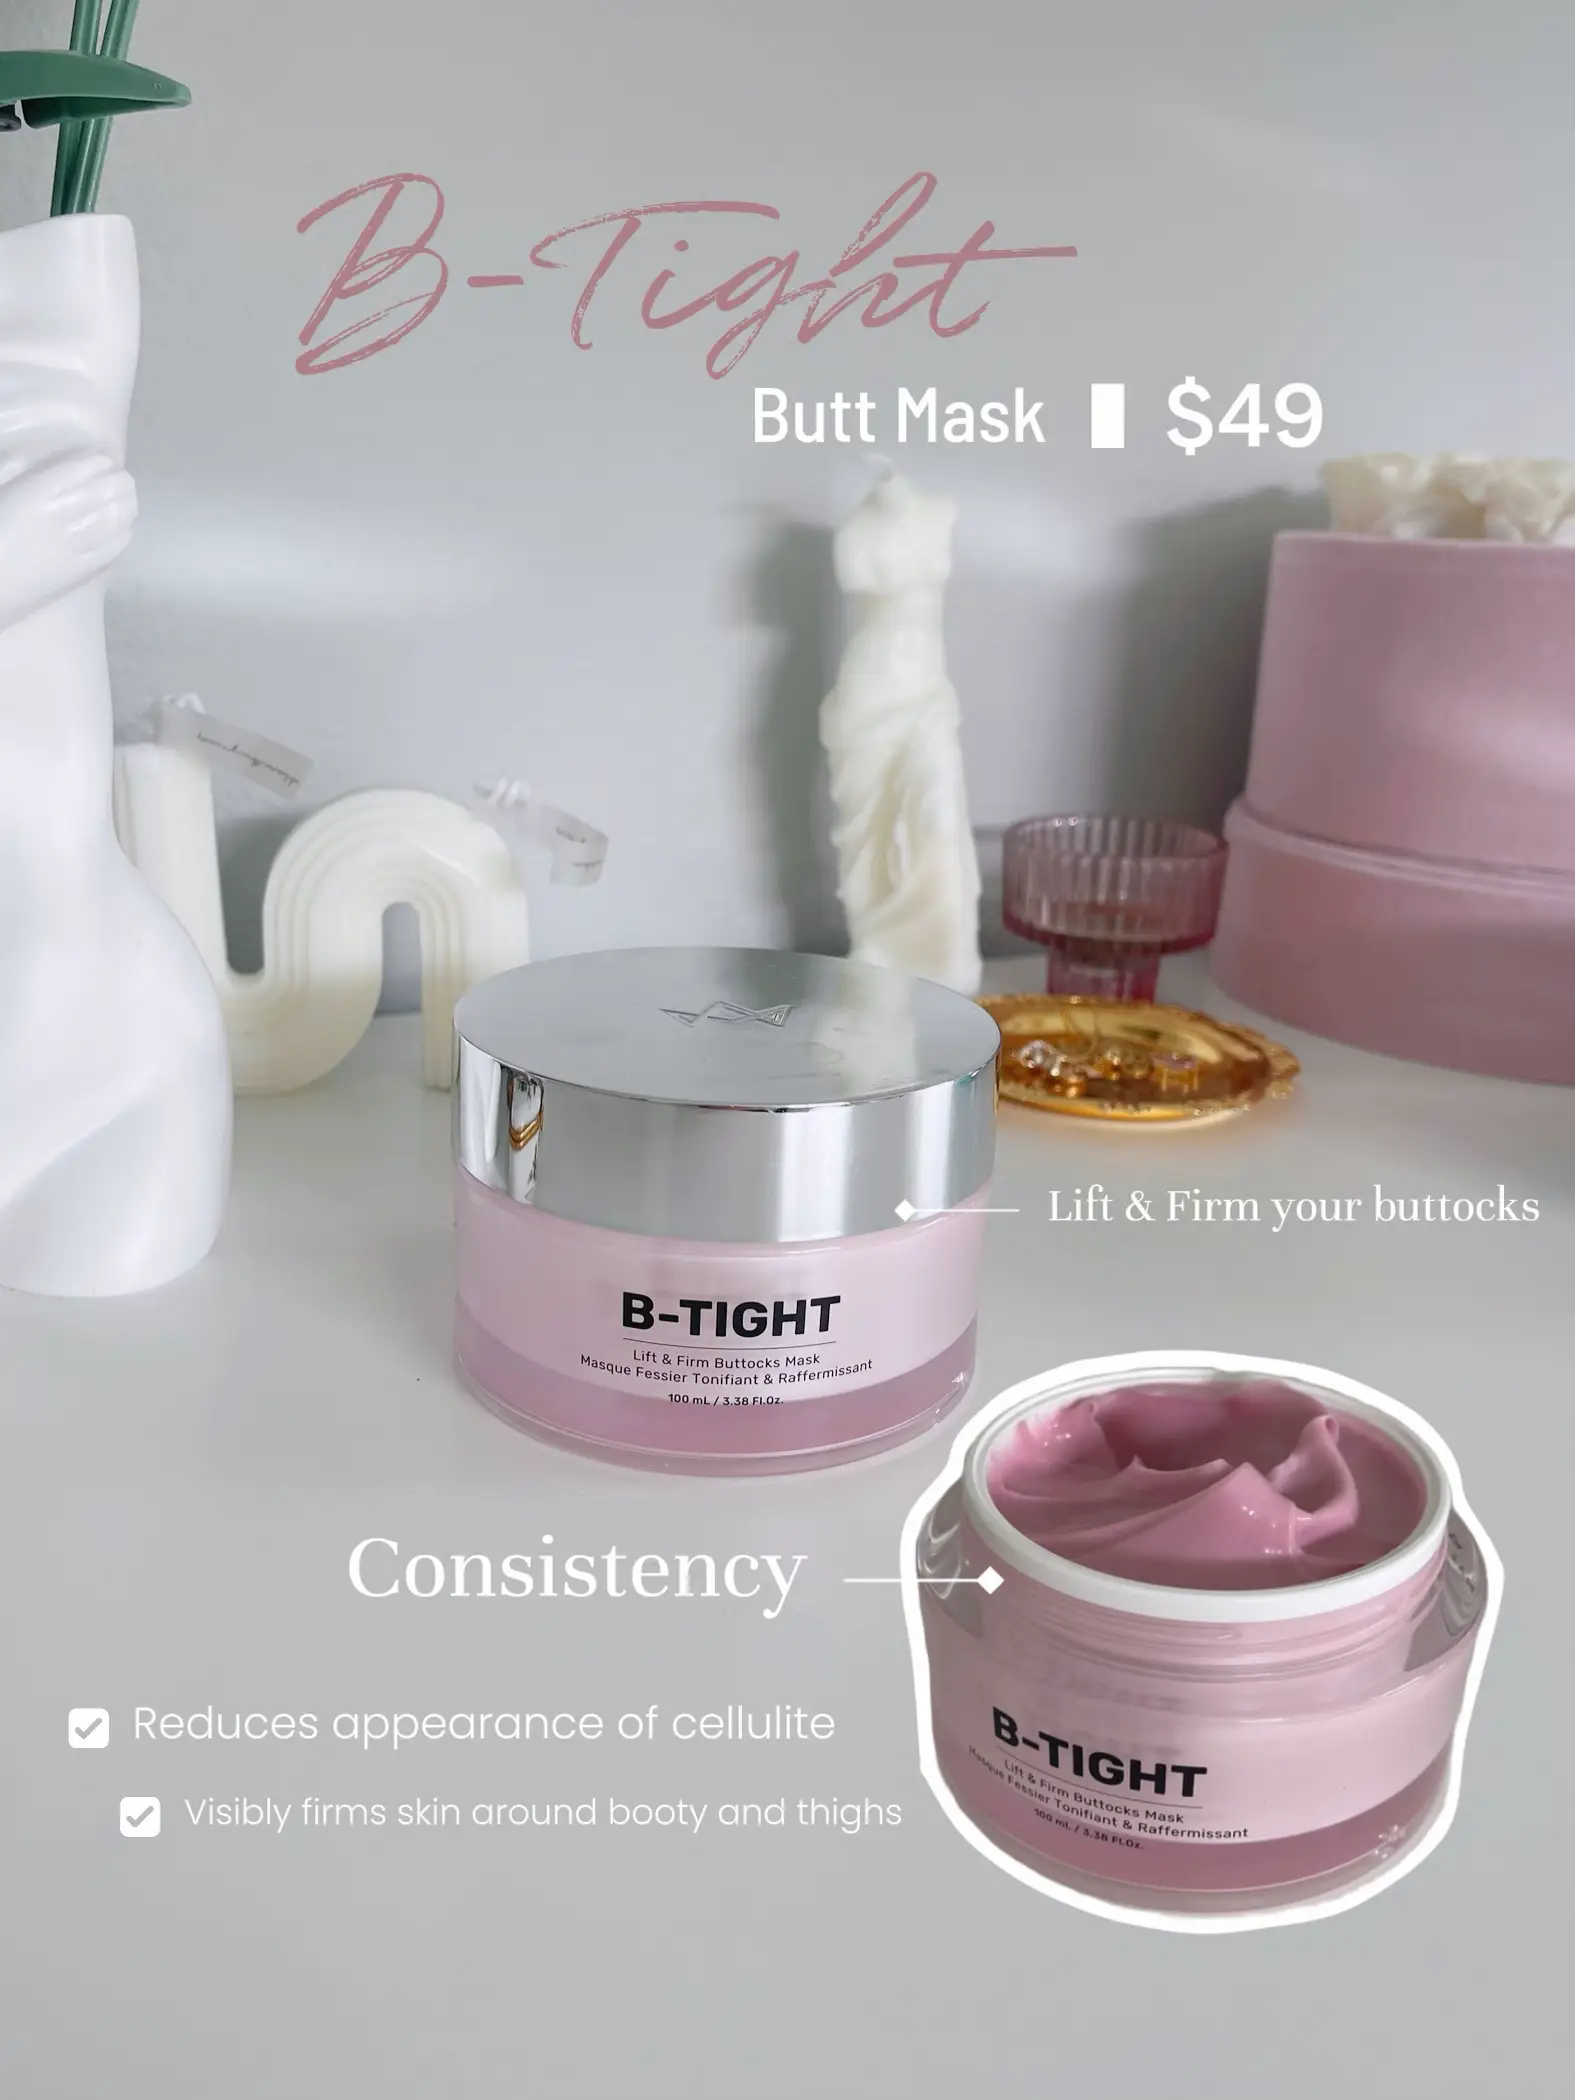 B-TIGHT, Lift & Firm Booty Mask